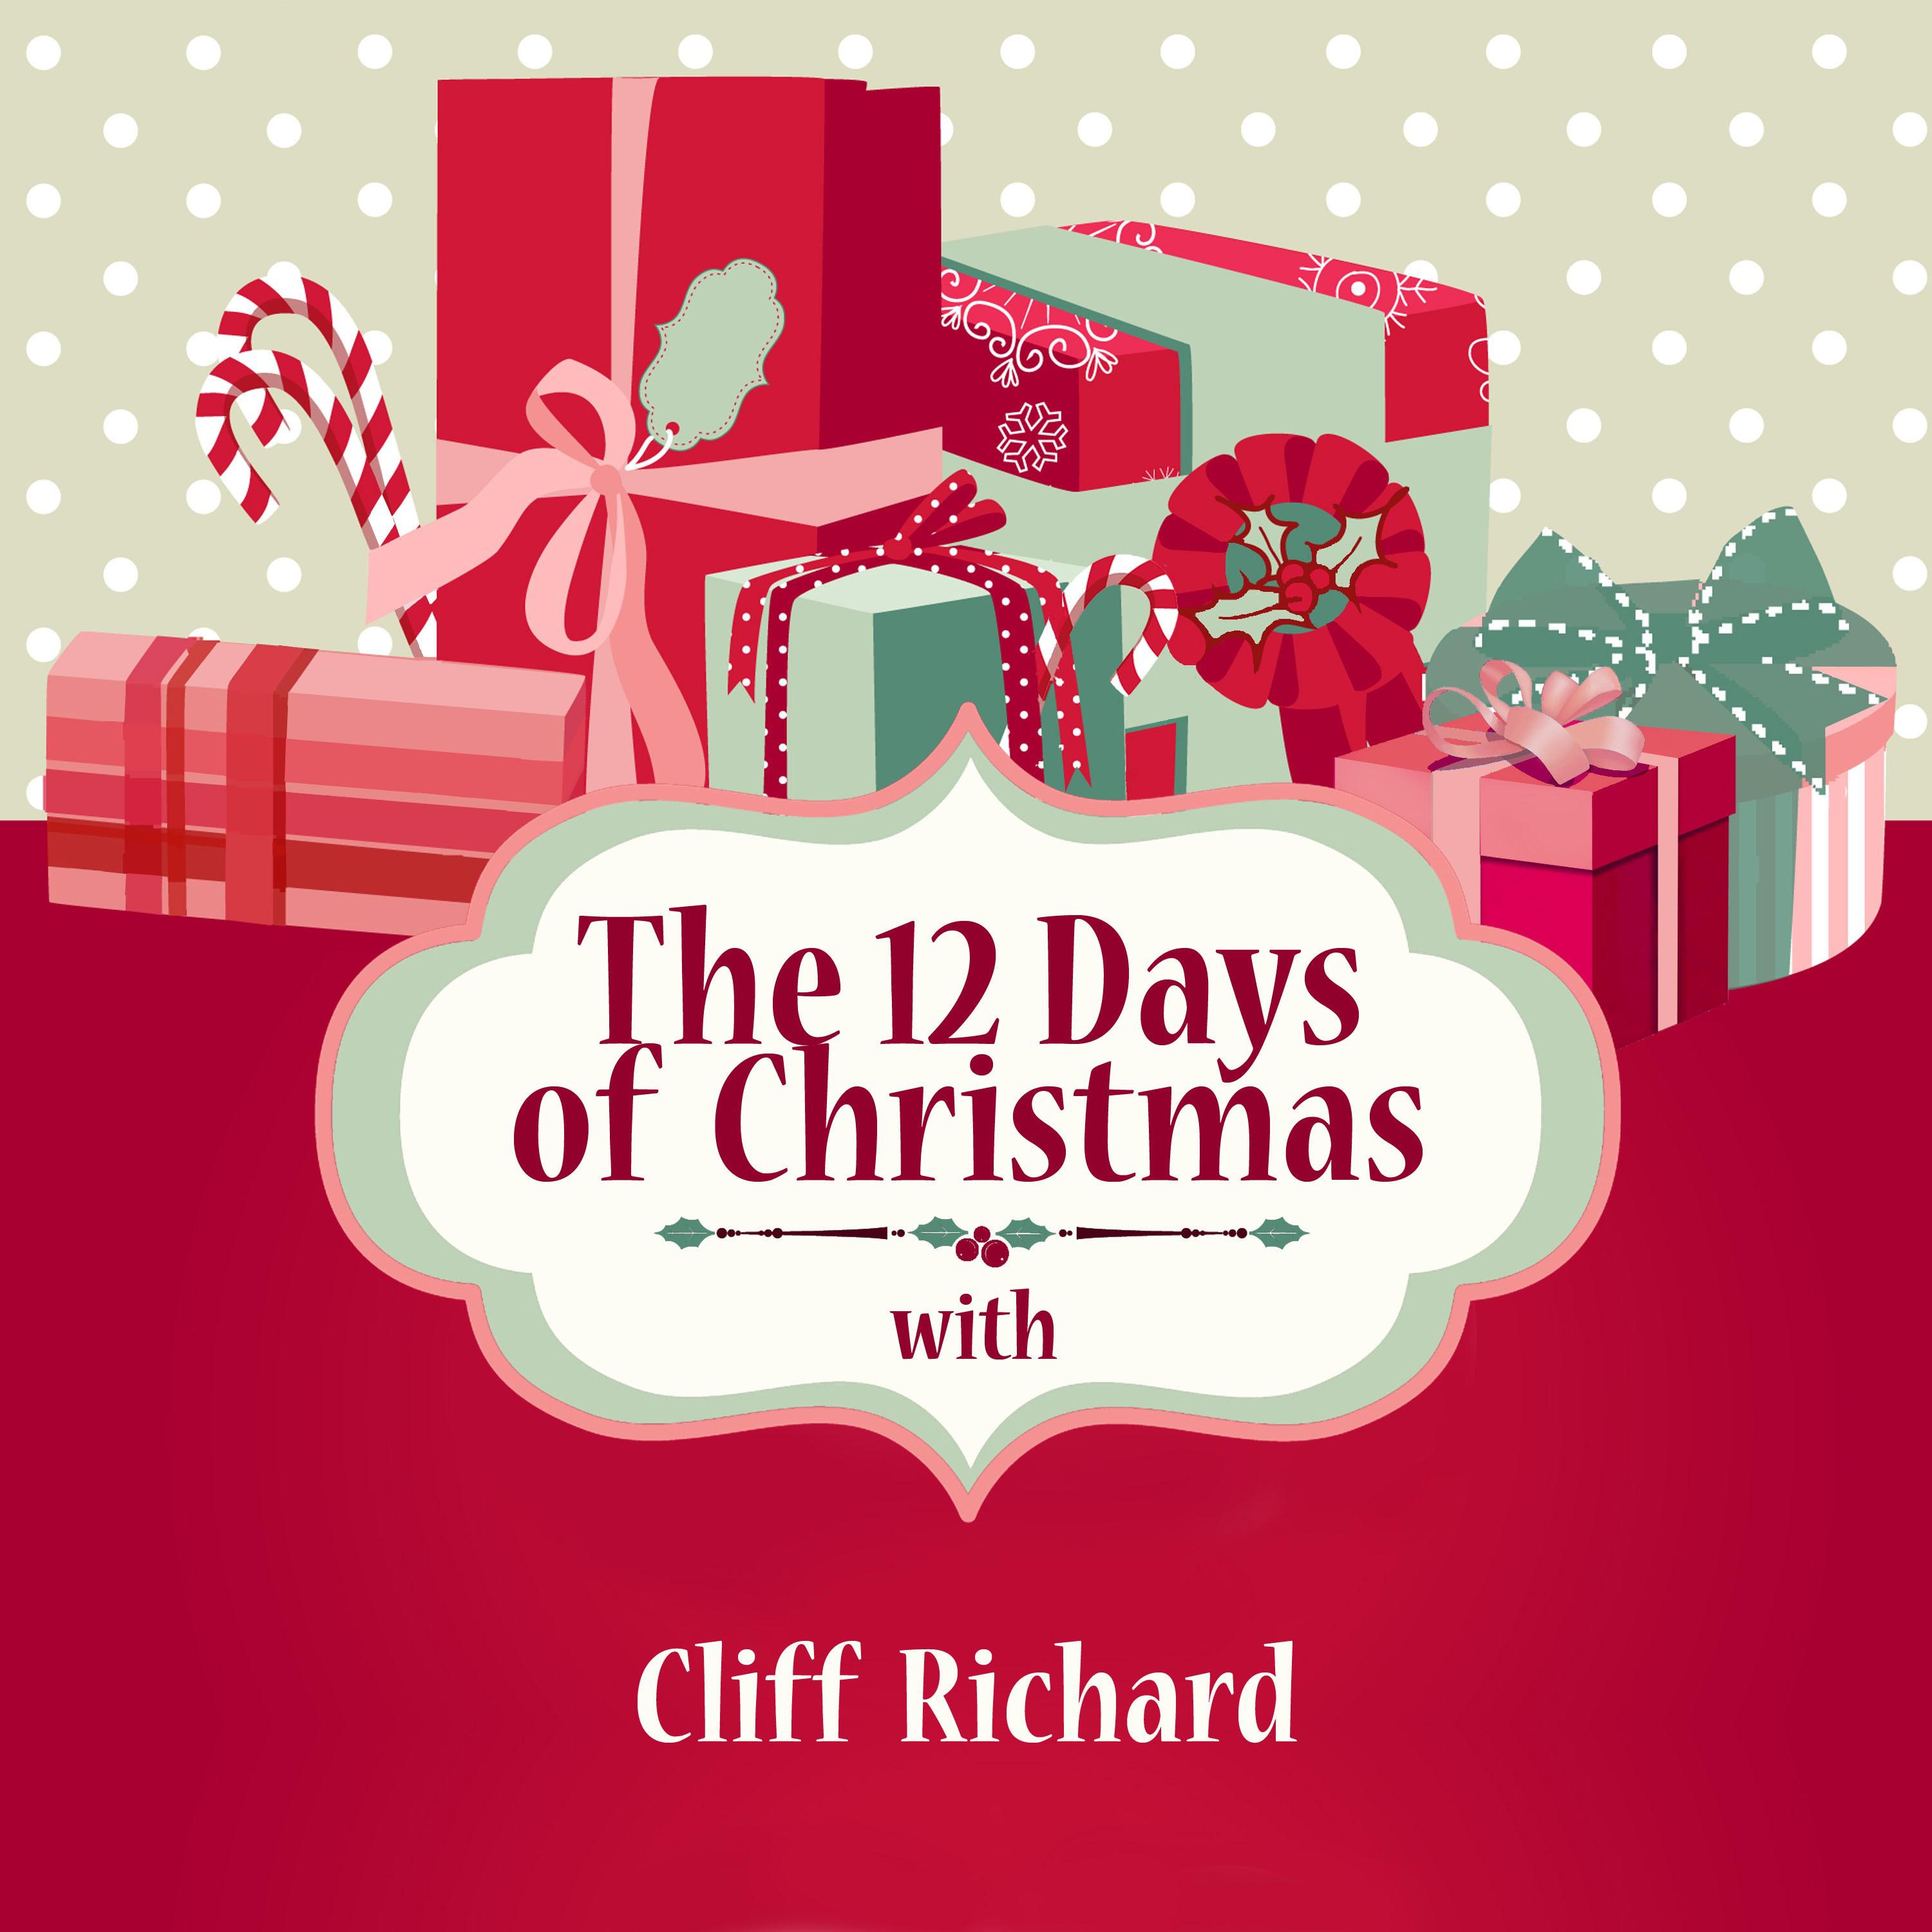 The 12 Days of Christmas with Cliff Richard